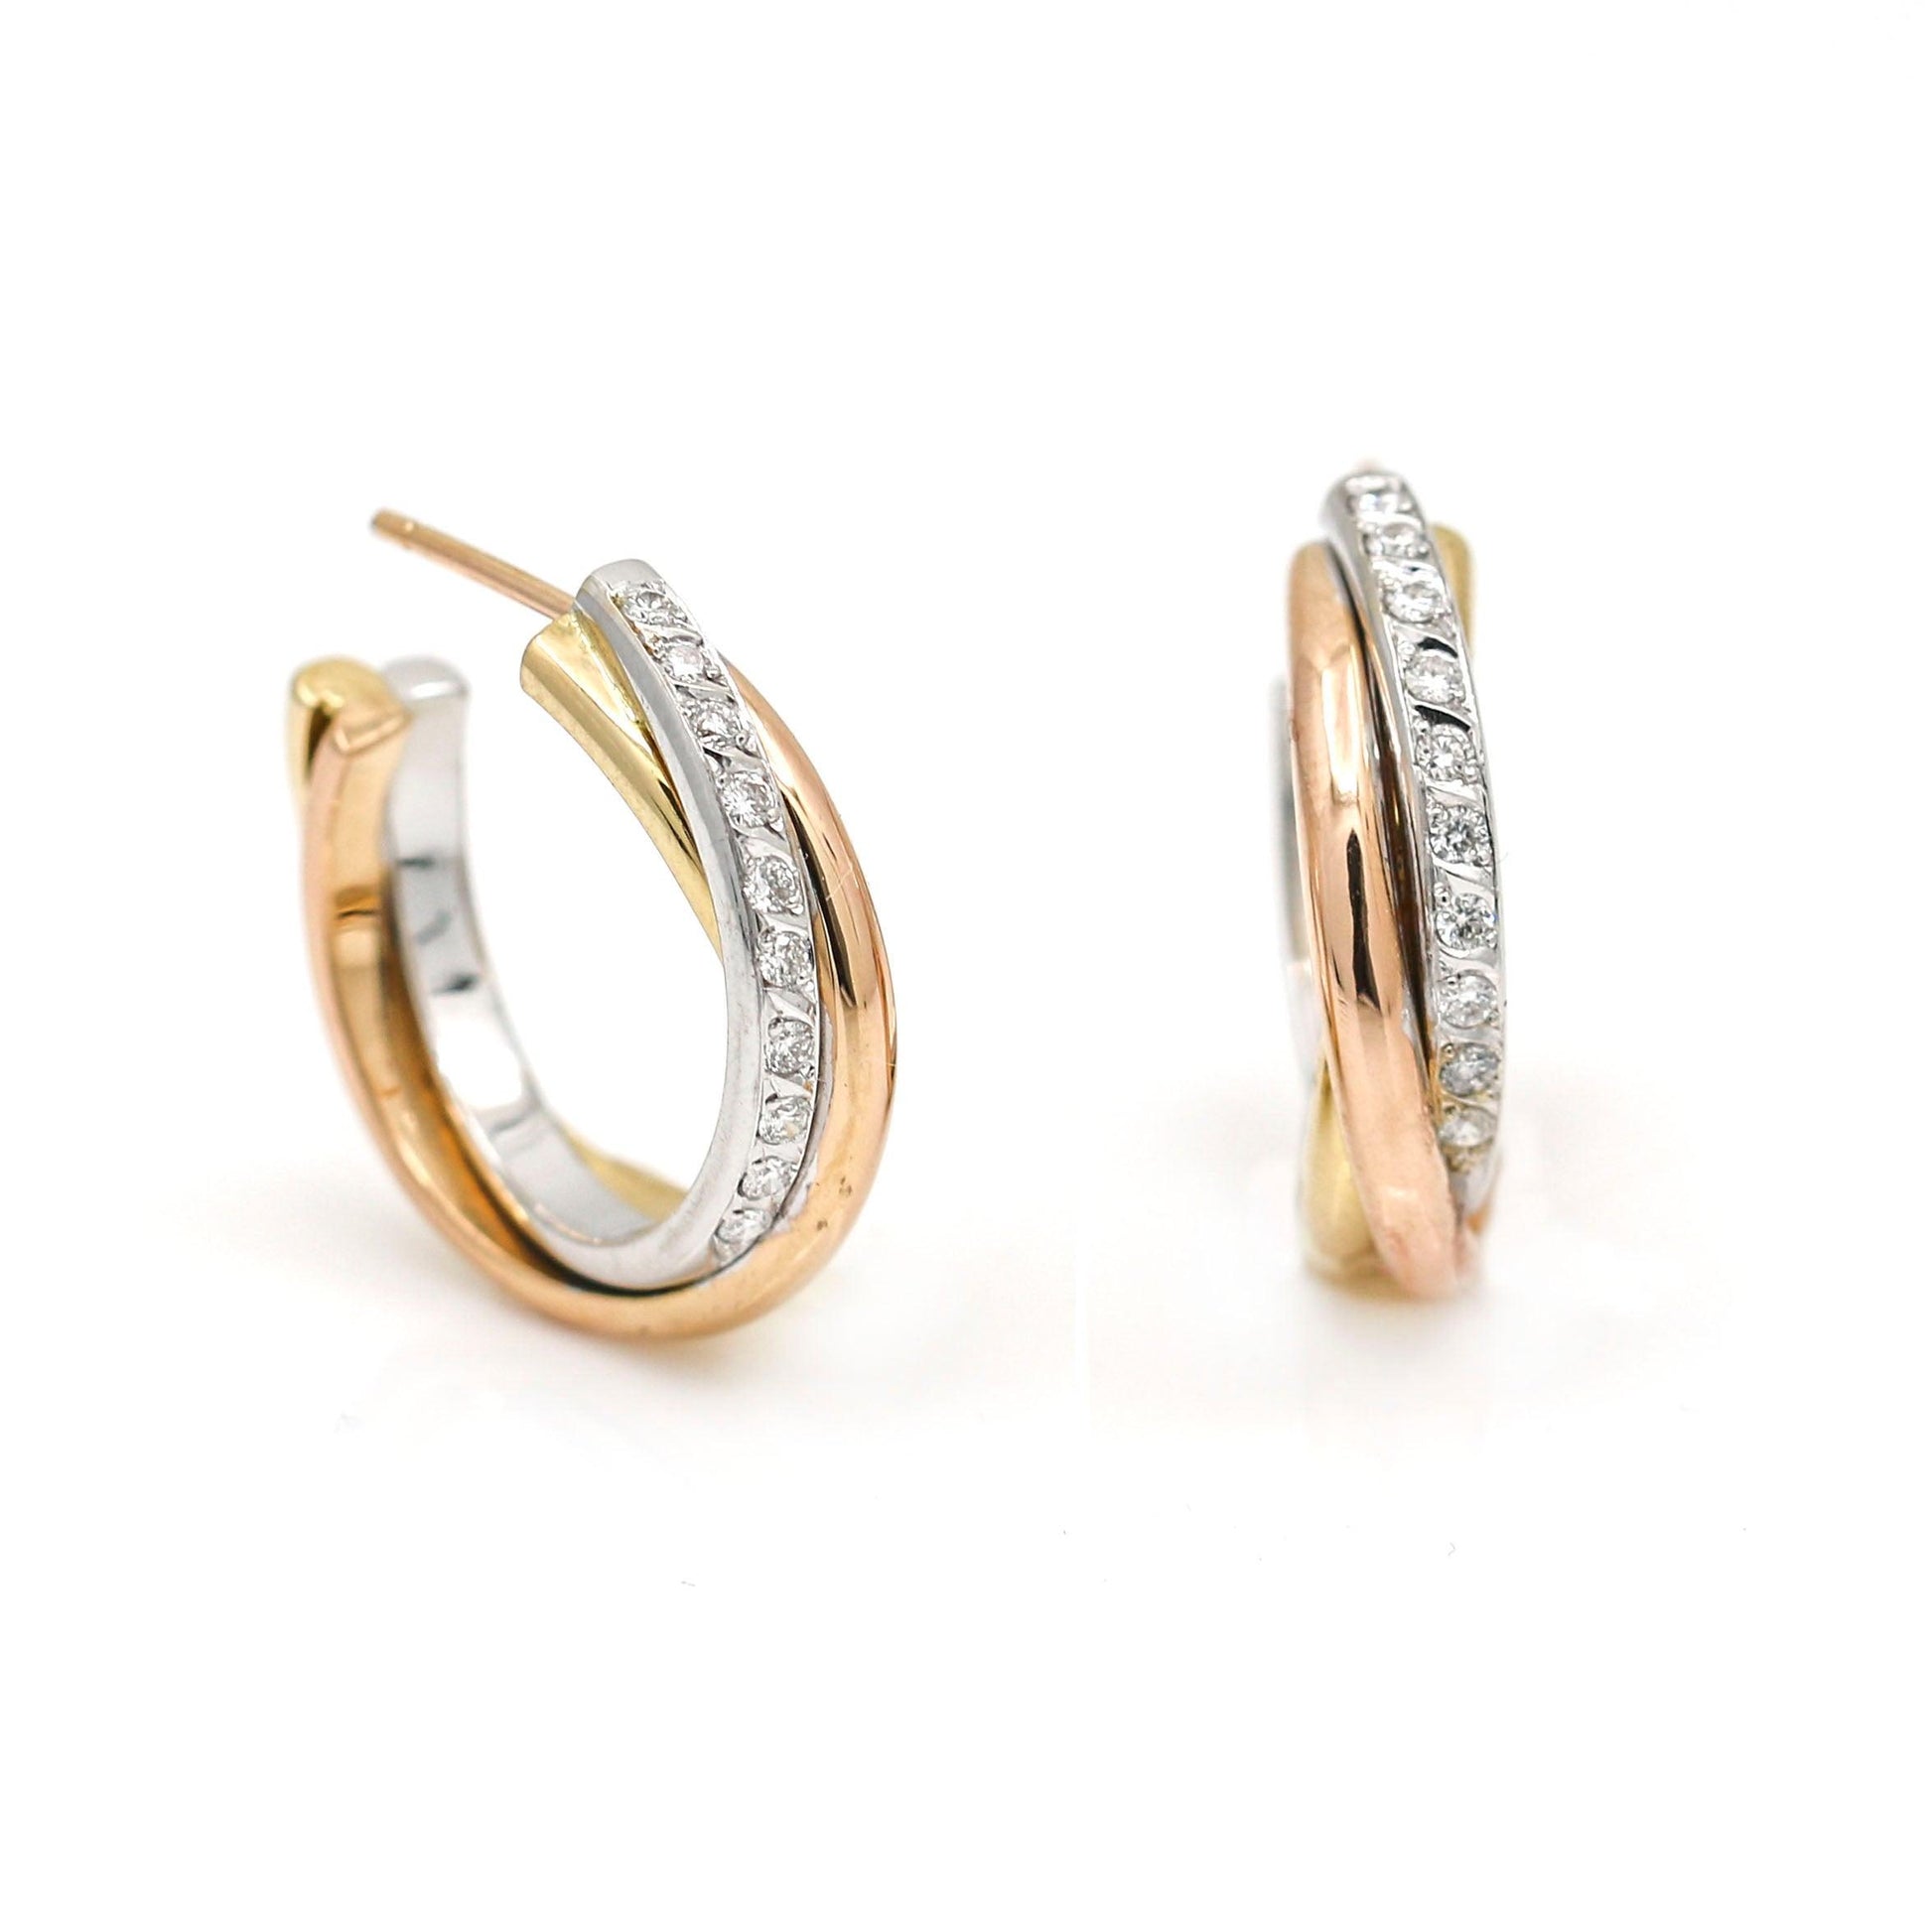 Women's Tri-Color Diamond Hoop Earrings in 18k Rose, White and Yellow Gold - 31 Jewels Inc.